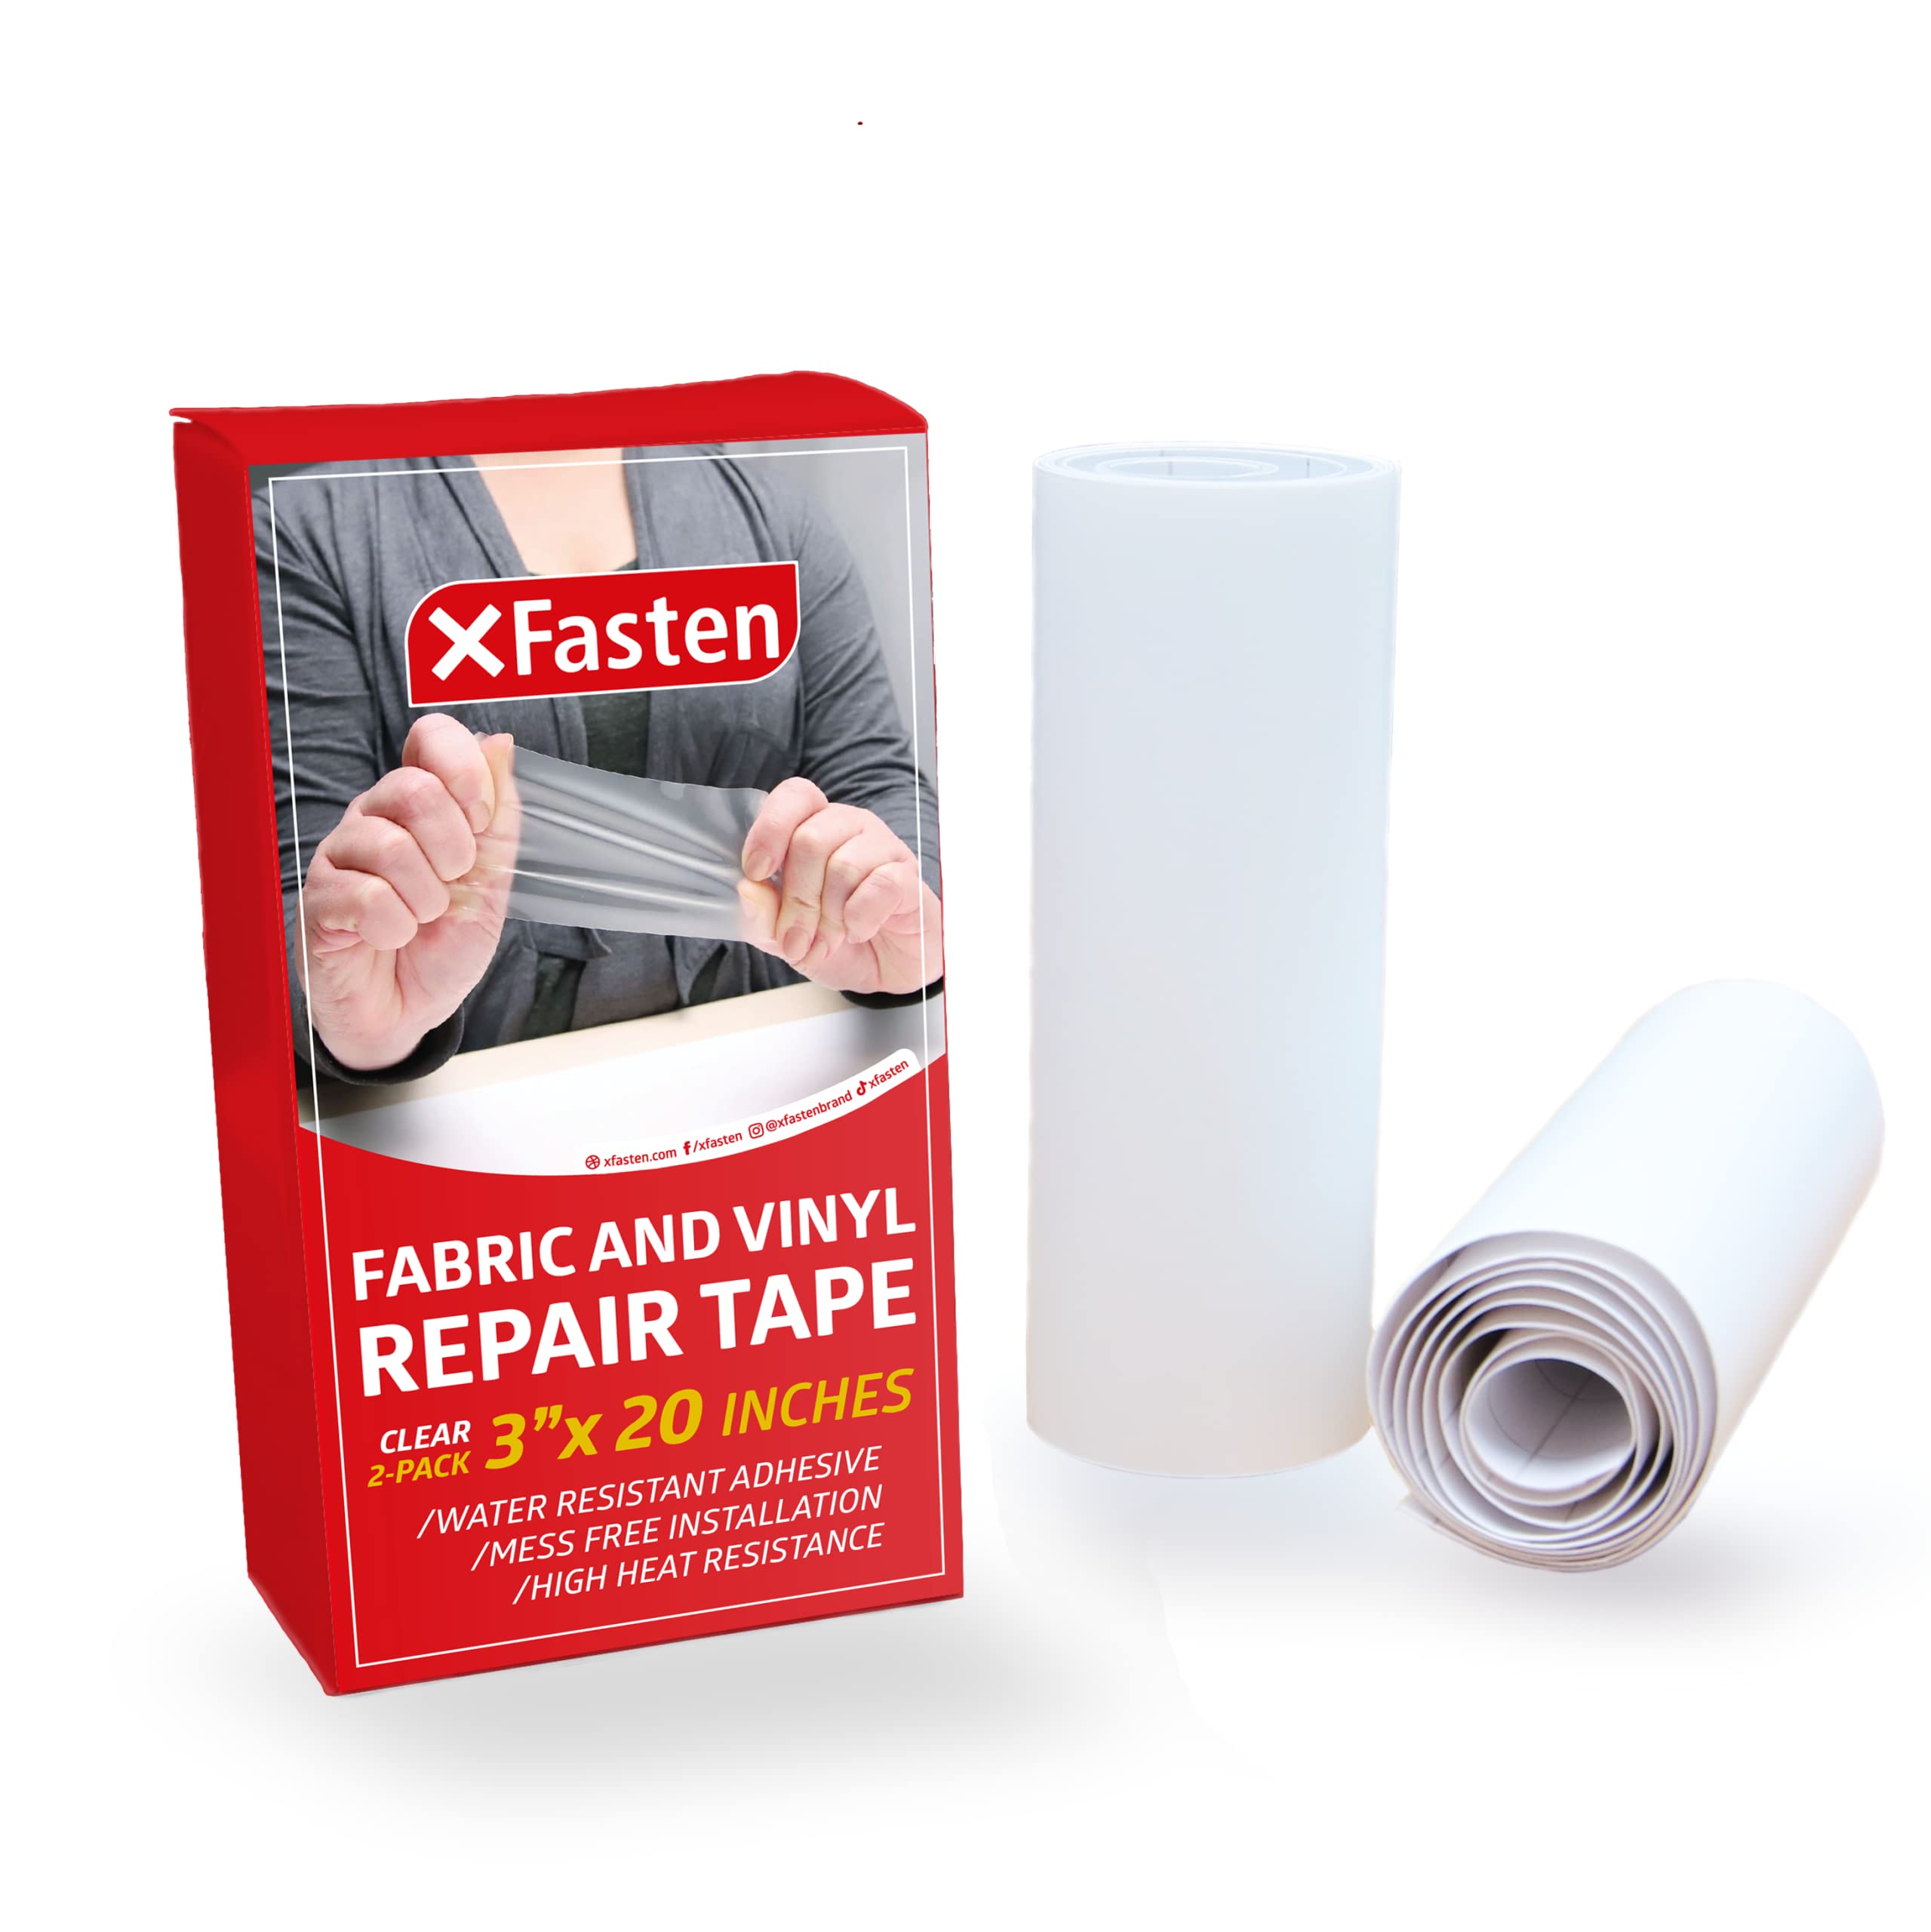 XFasten Fabric and Vinyl Repair Tape, Clear, 3-Inches by 20-Inches